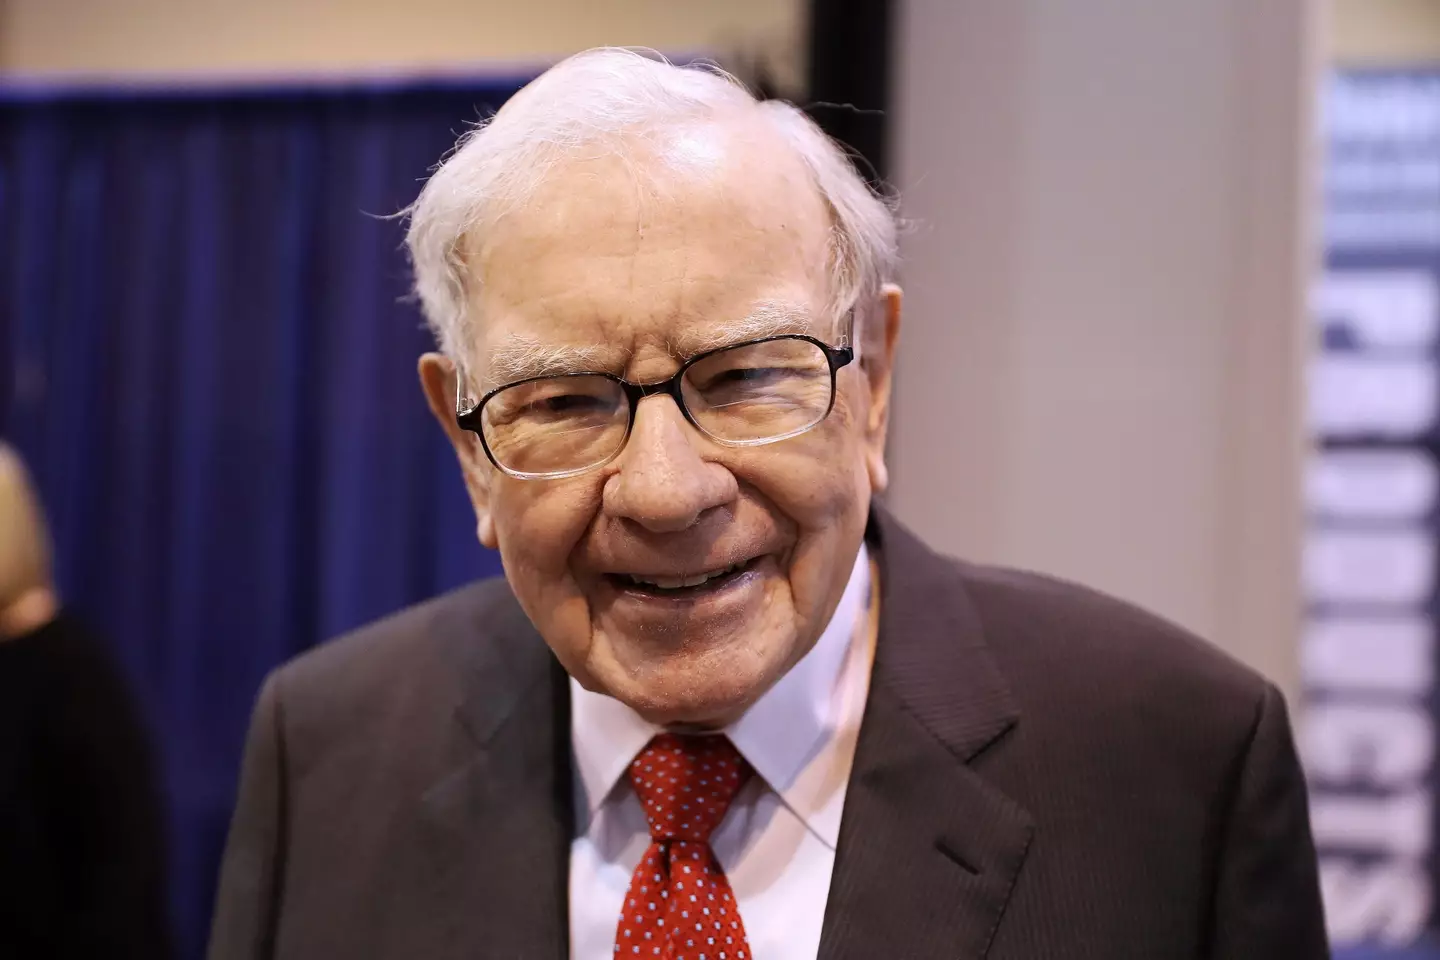 92-year-old Warren Buffett is now the third richest on the American rich list.